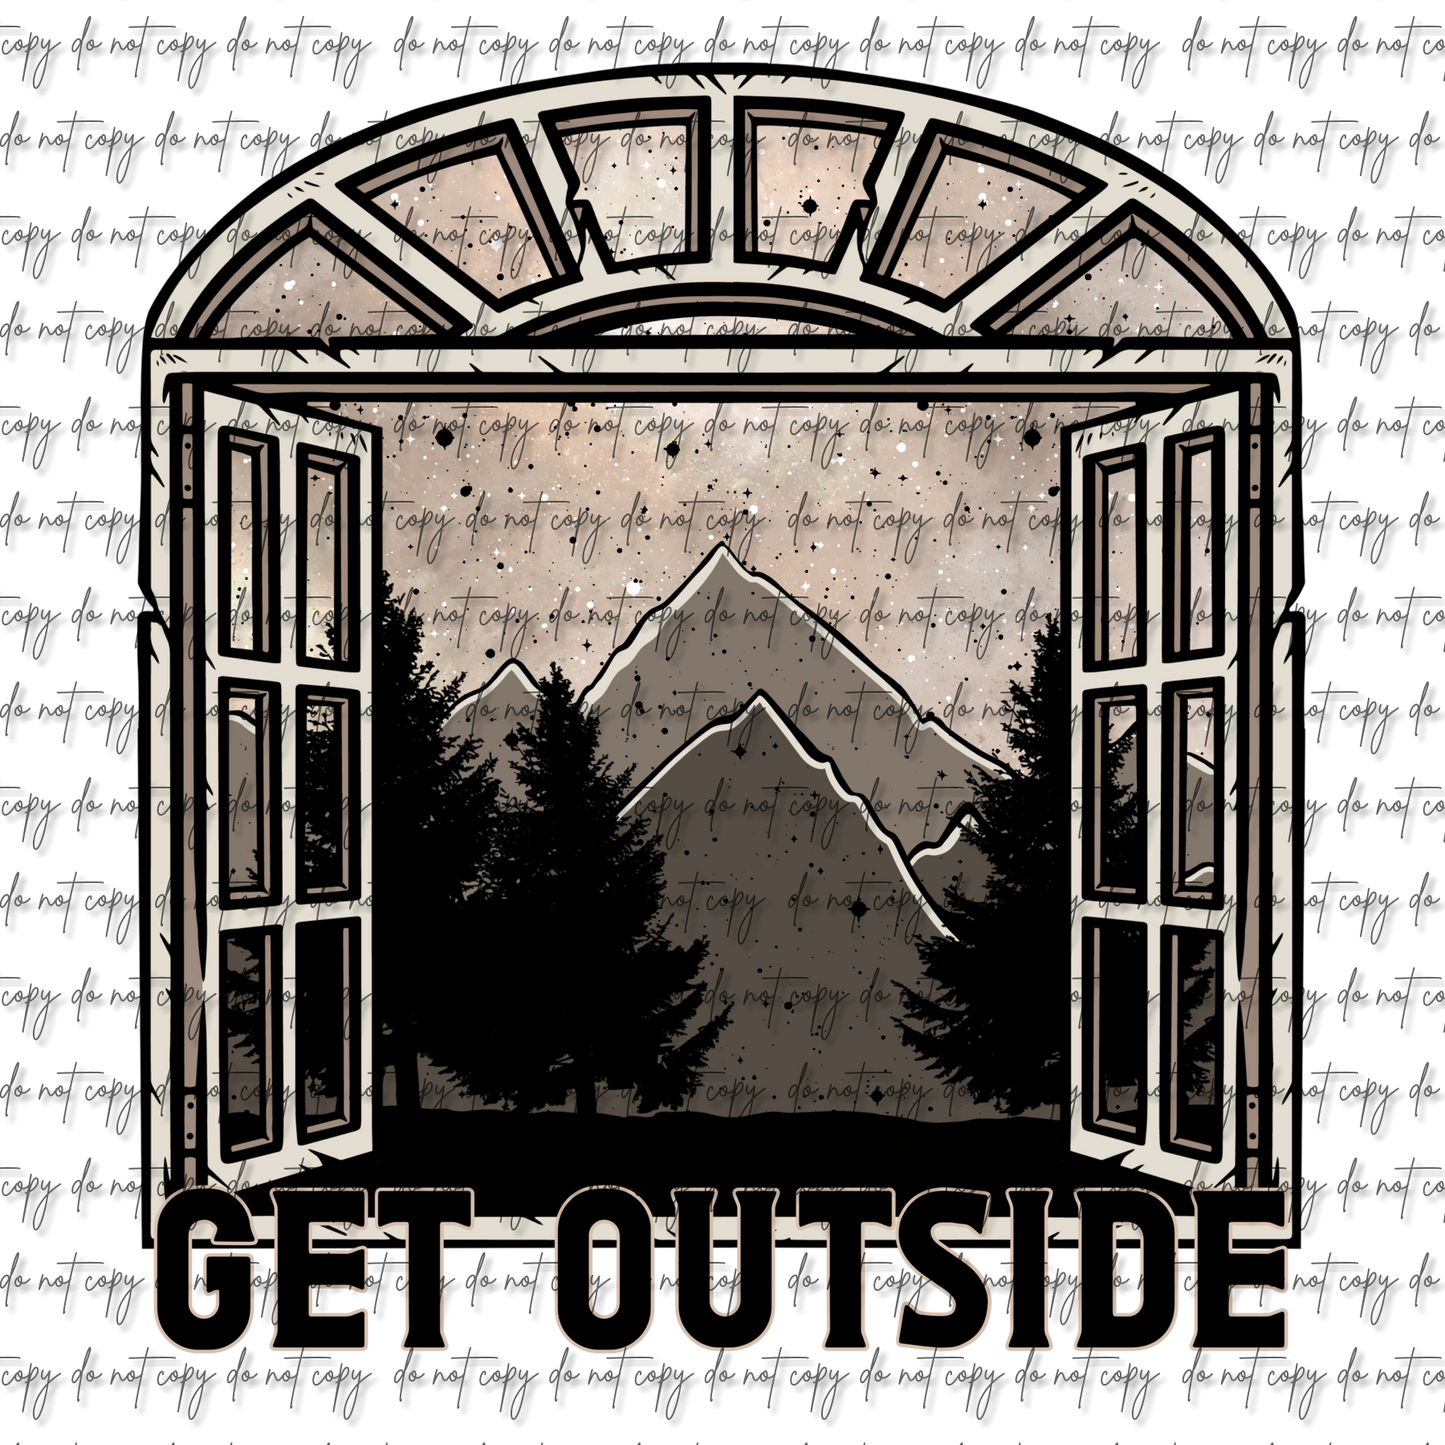 GET OUTSIDE 2 UVDTF DECAL